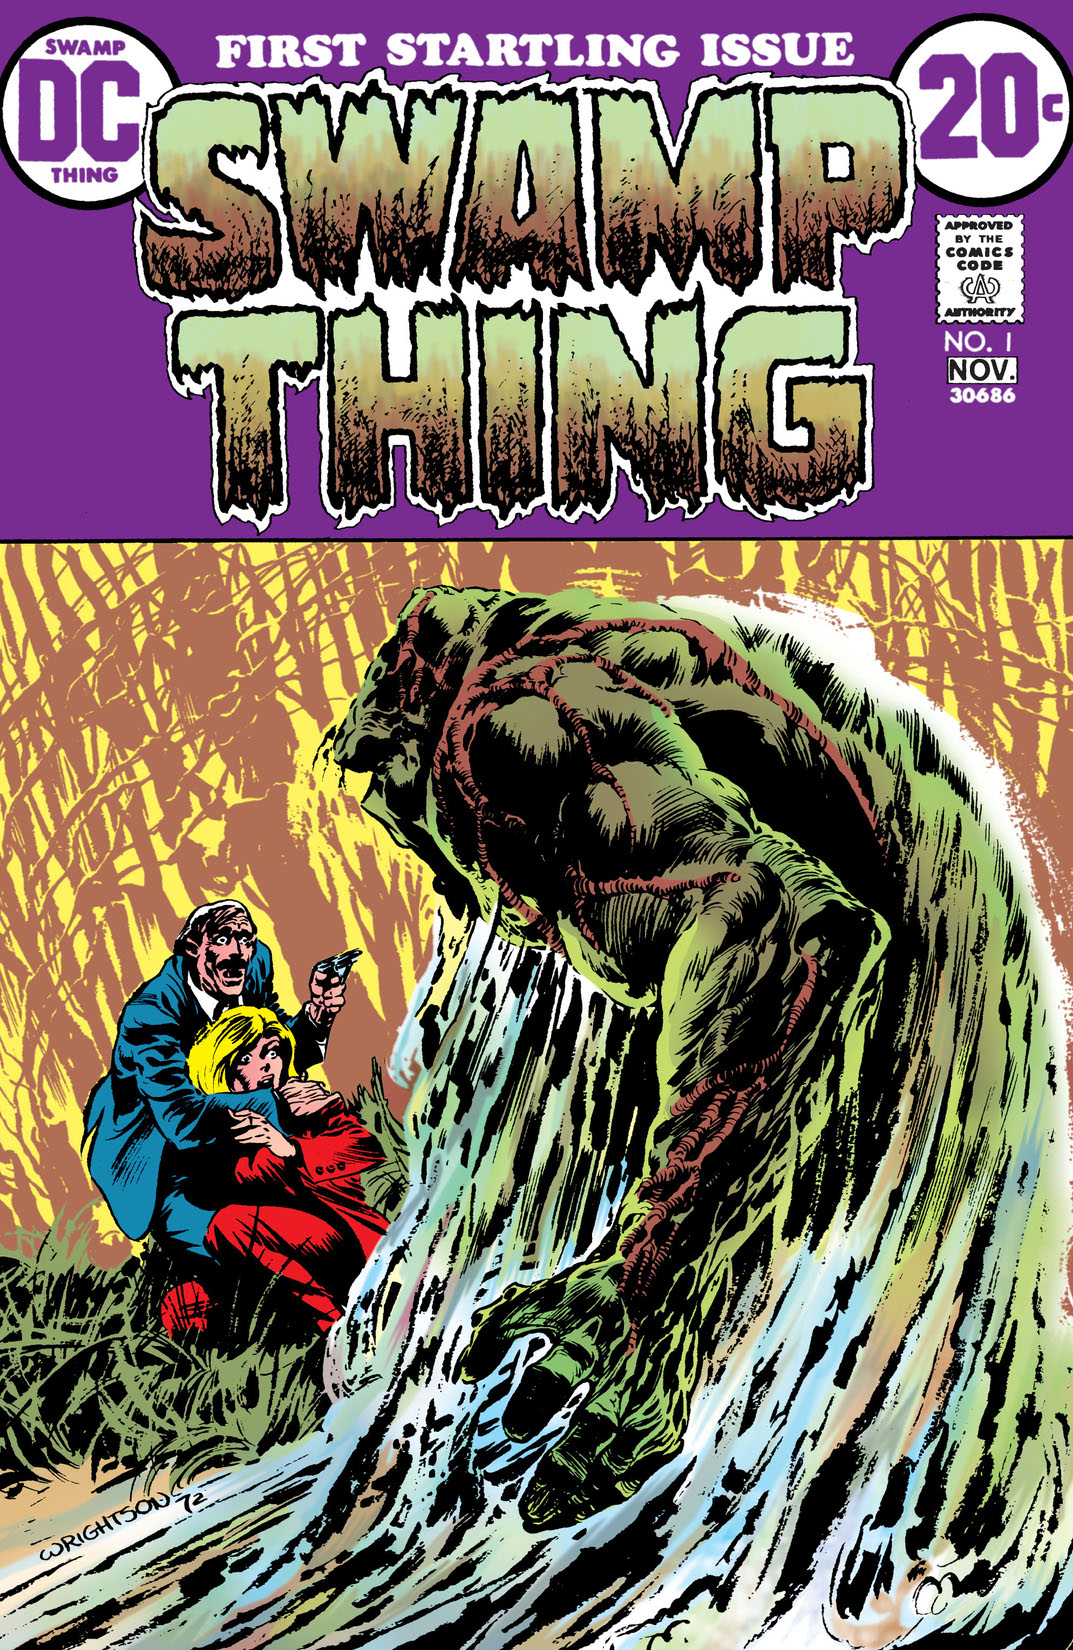 Swamp Thing (1972-) #1 preview images